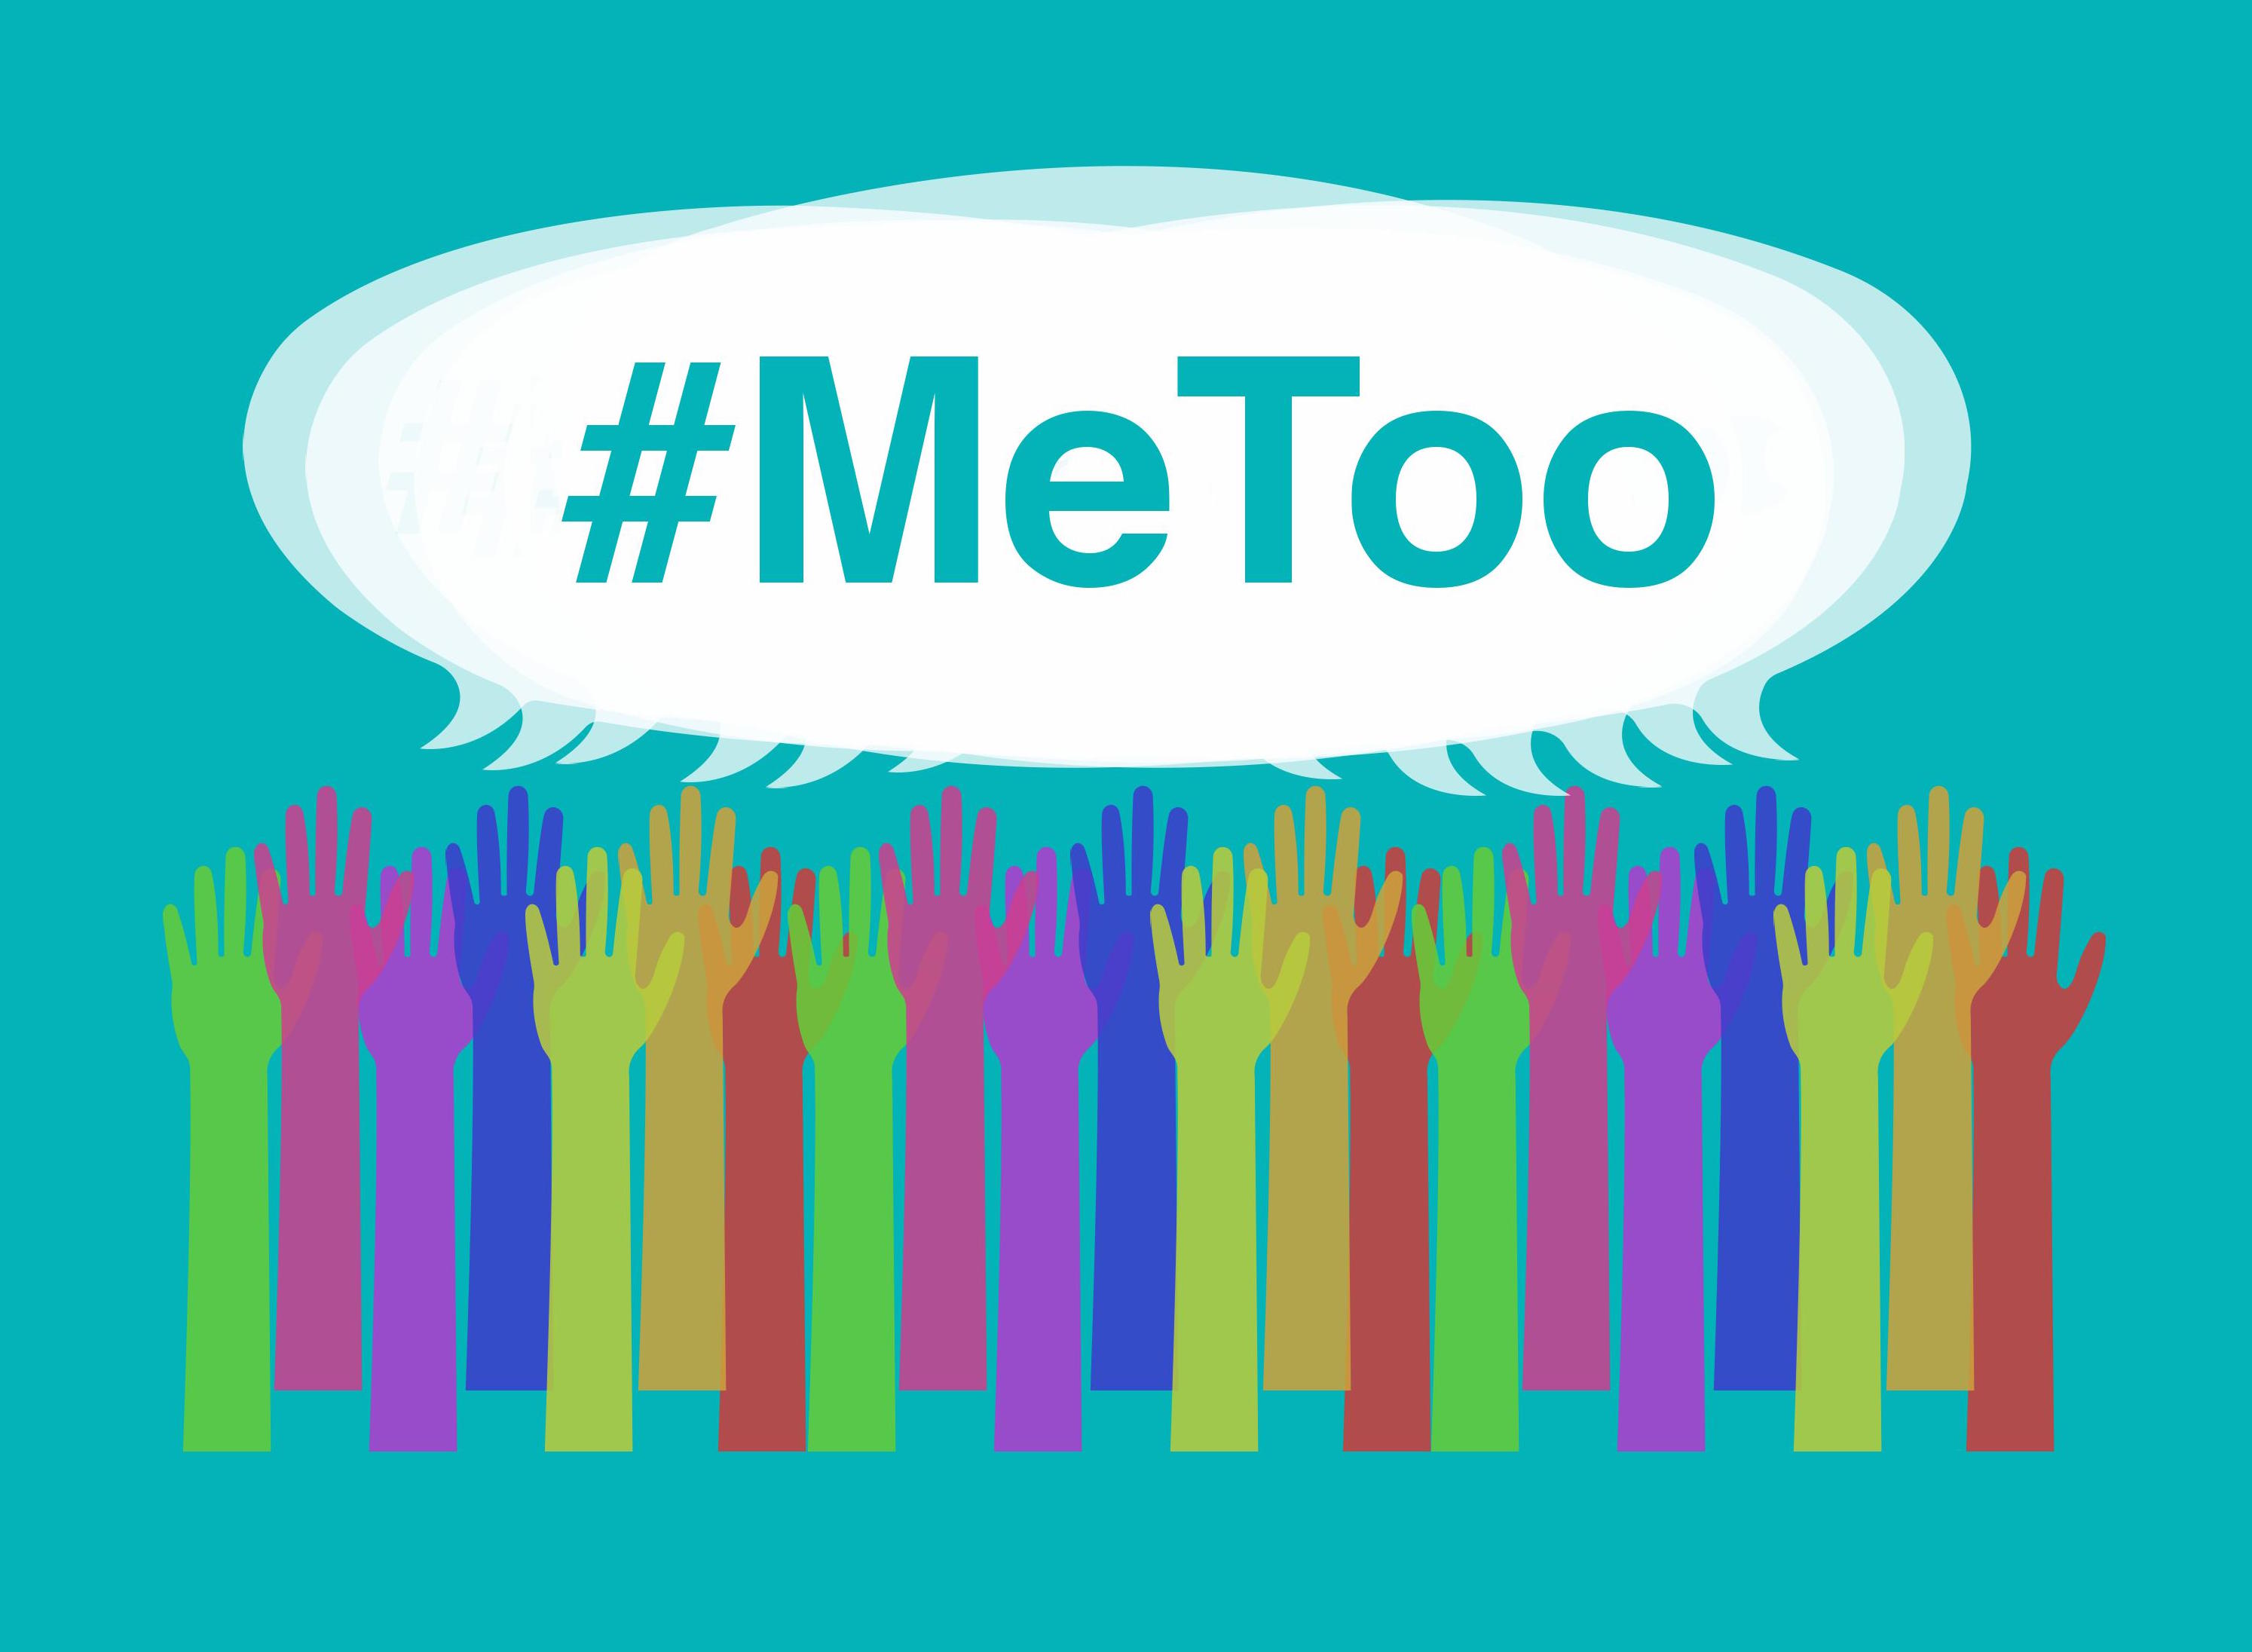 GRAPHIC: This graphic is for the #MeToo campaign. It shows many hands raised with thought bubbles above the hands saying #MeToo. Graphic by The Signal reporter Marielle Gomez.